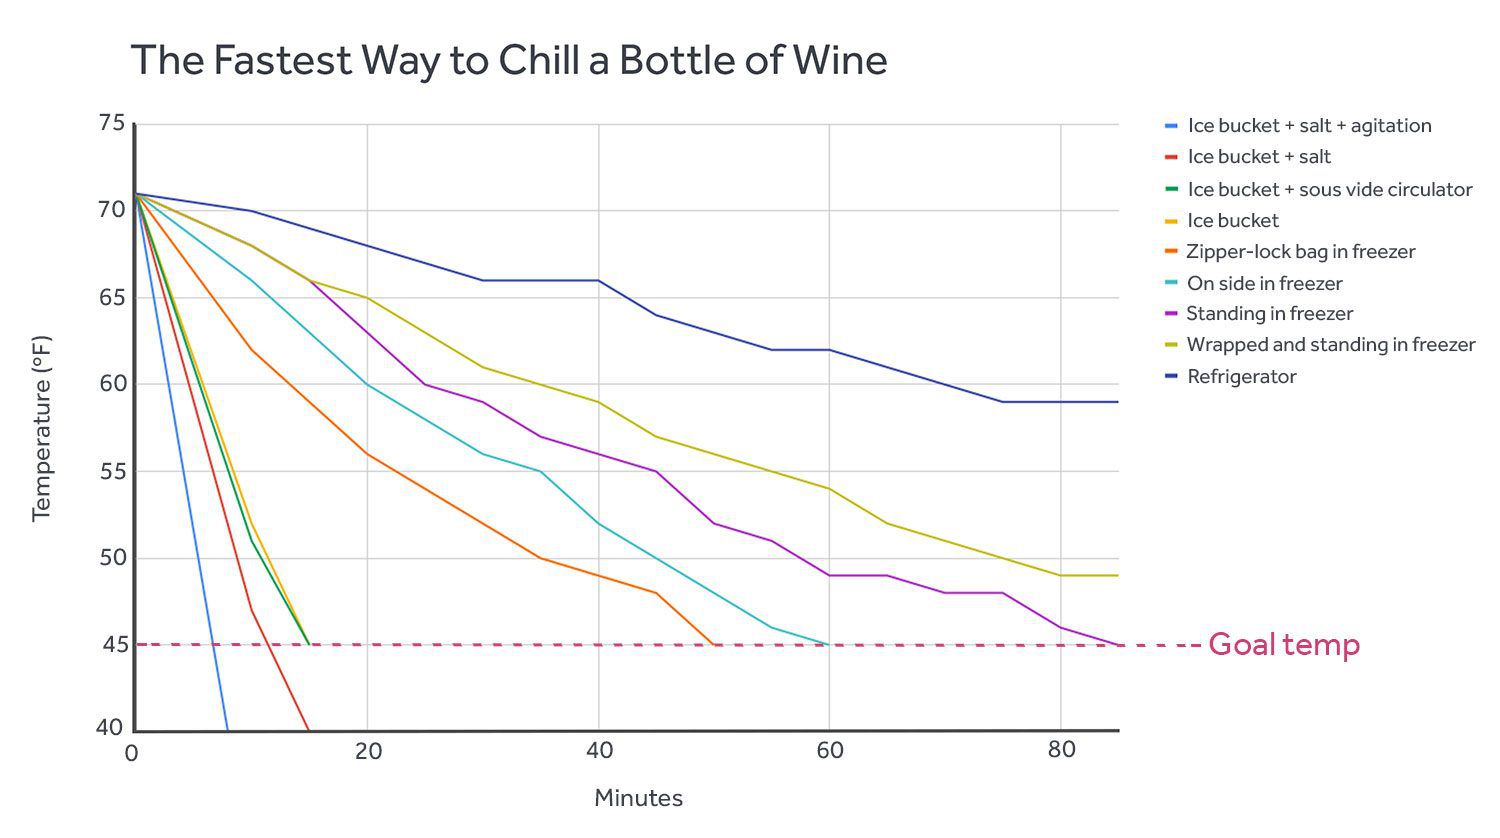 Image of a chart showing how long (in minutes) various methods of chilling wine took to reach 45 degrees Fahrenheit.